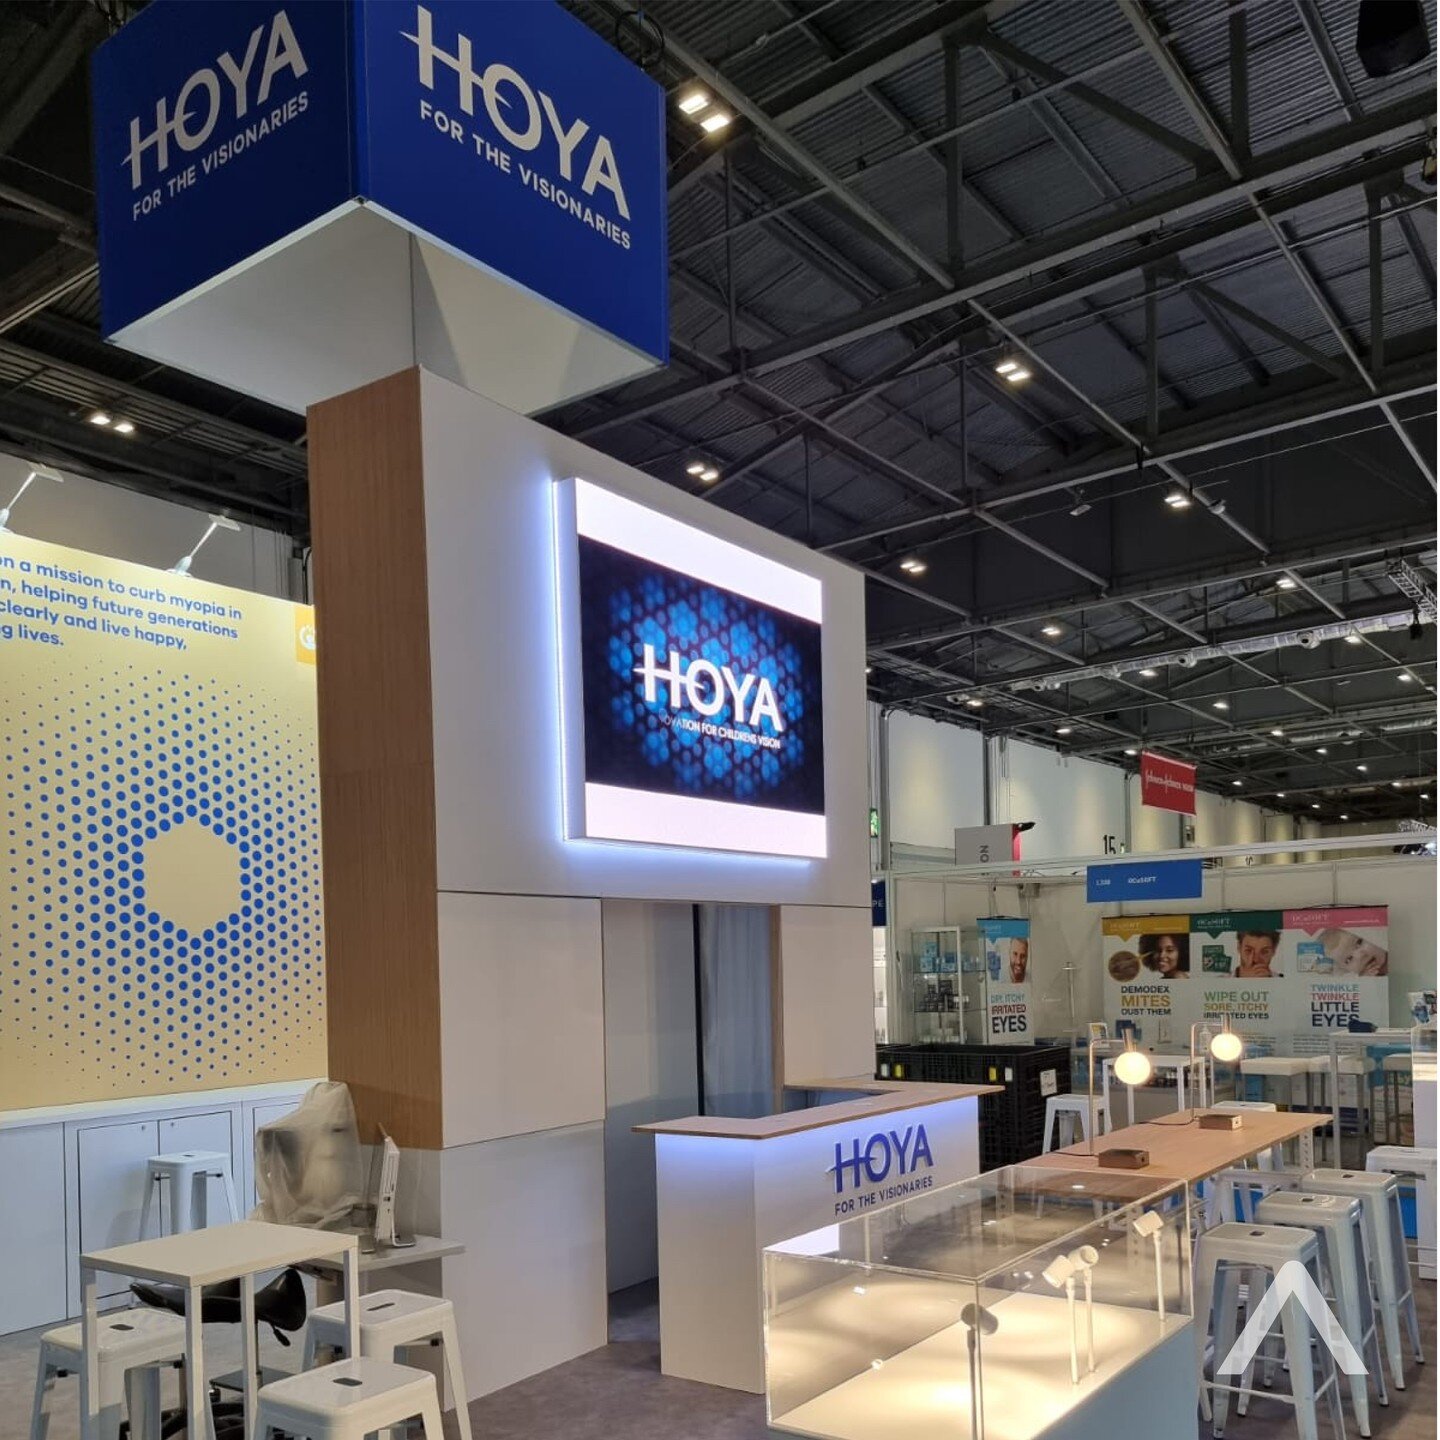 Hoya at 100% Optical last weekend, using bamboo and reusable components to create a sustainable design 

#alchemyexpo #exhibitiondesign #exhibitionbooth #expodesign #exhibitionstanddesign #exhibitionstand #tradeshow #tradeshowbooth #design #boothdesi